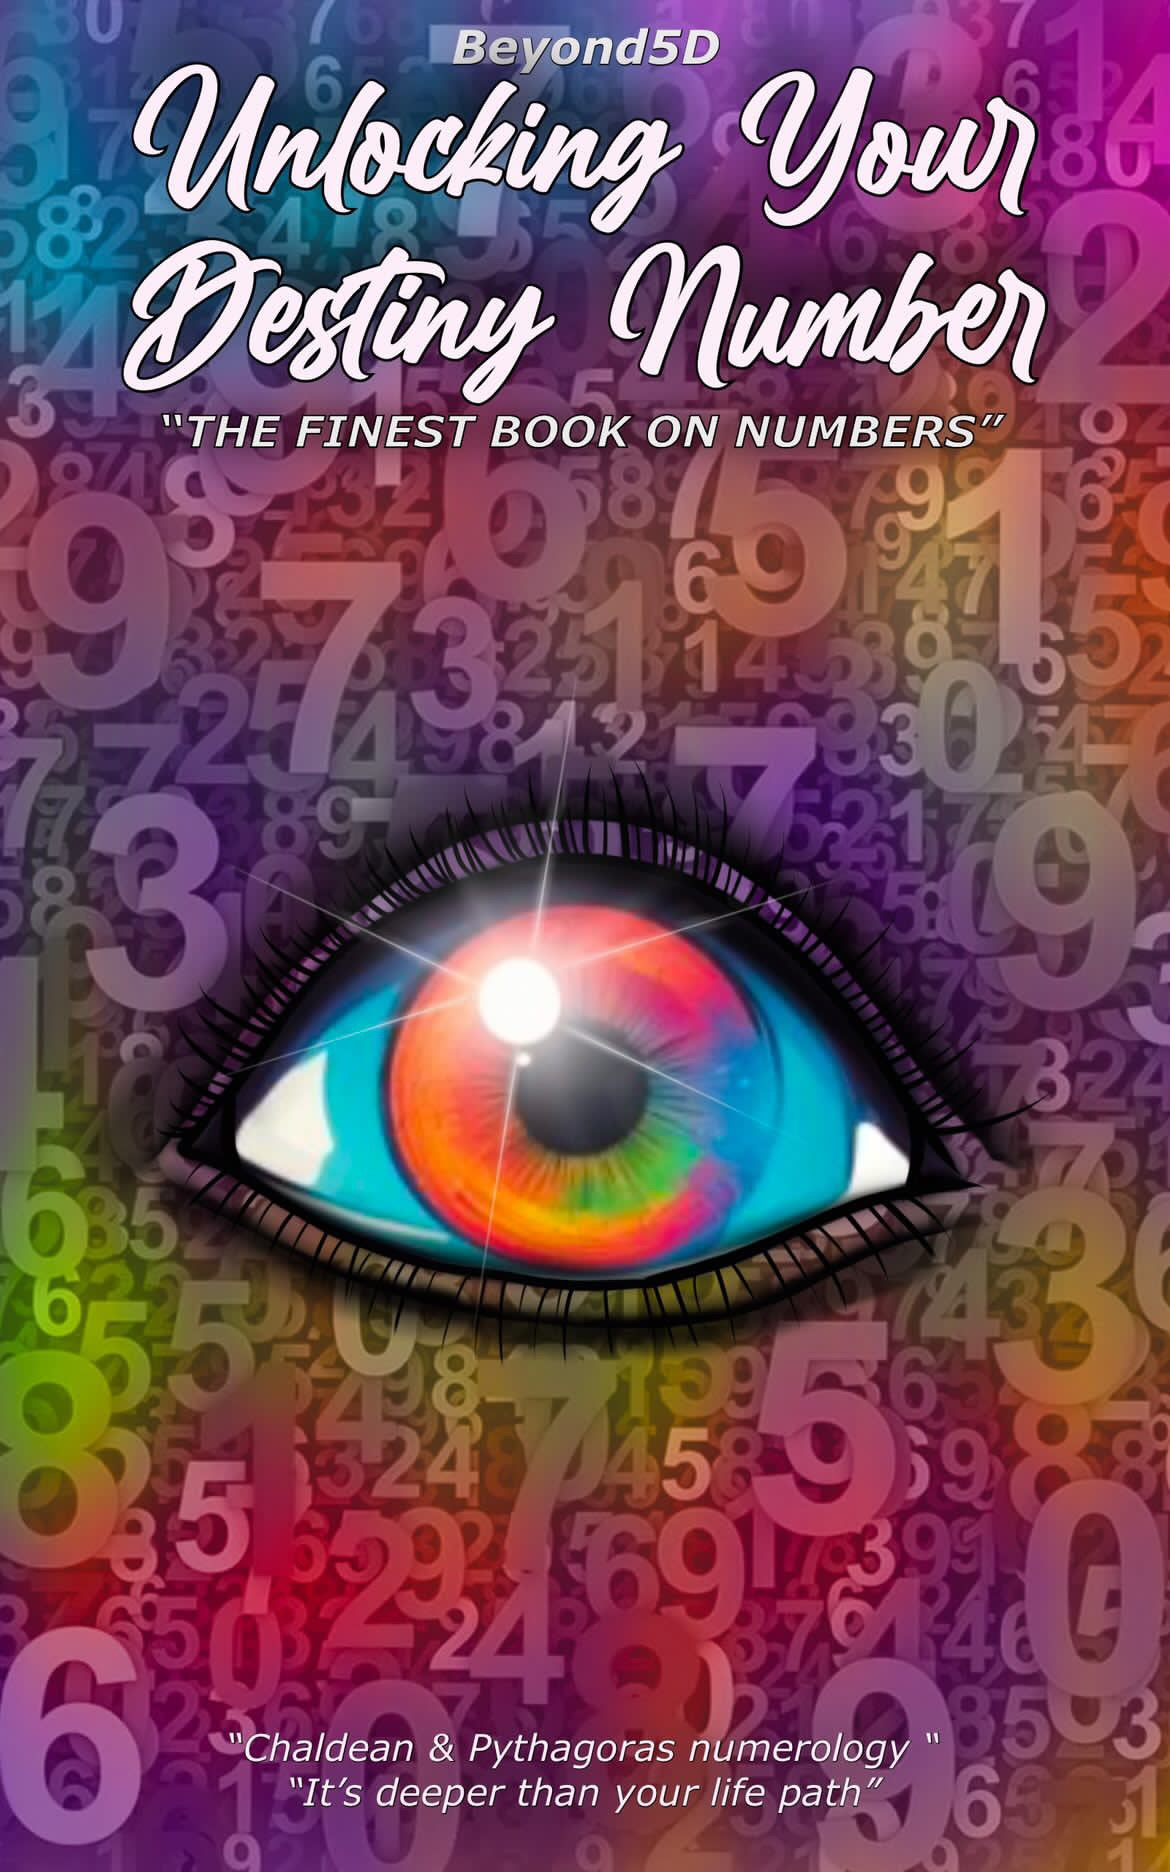 Unlocking Your Destiny Number - The Finest Book On Numbers (Electronic Book)